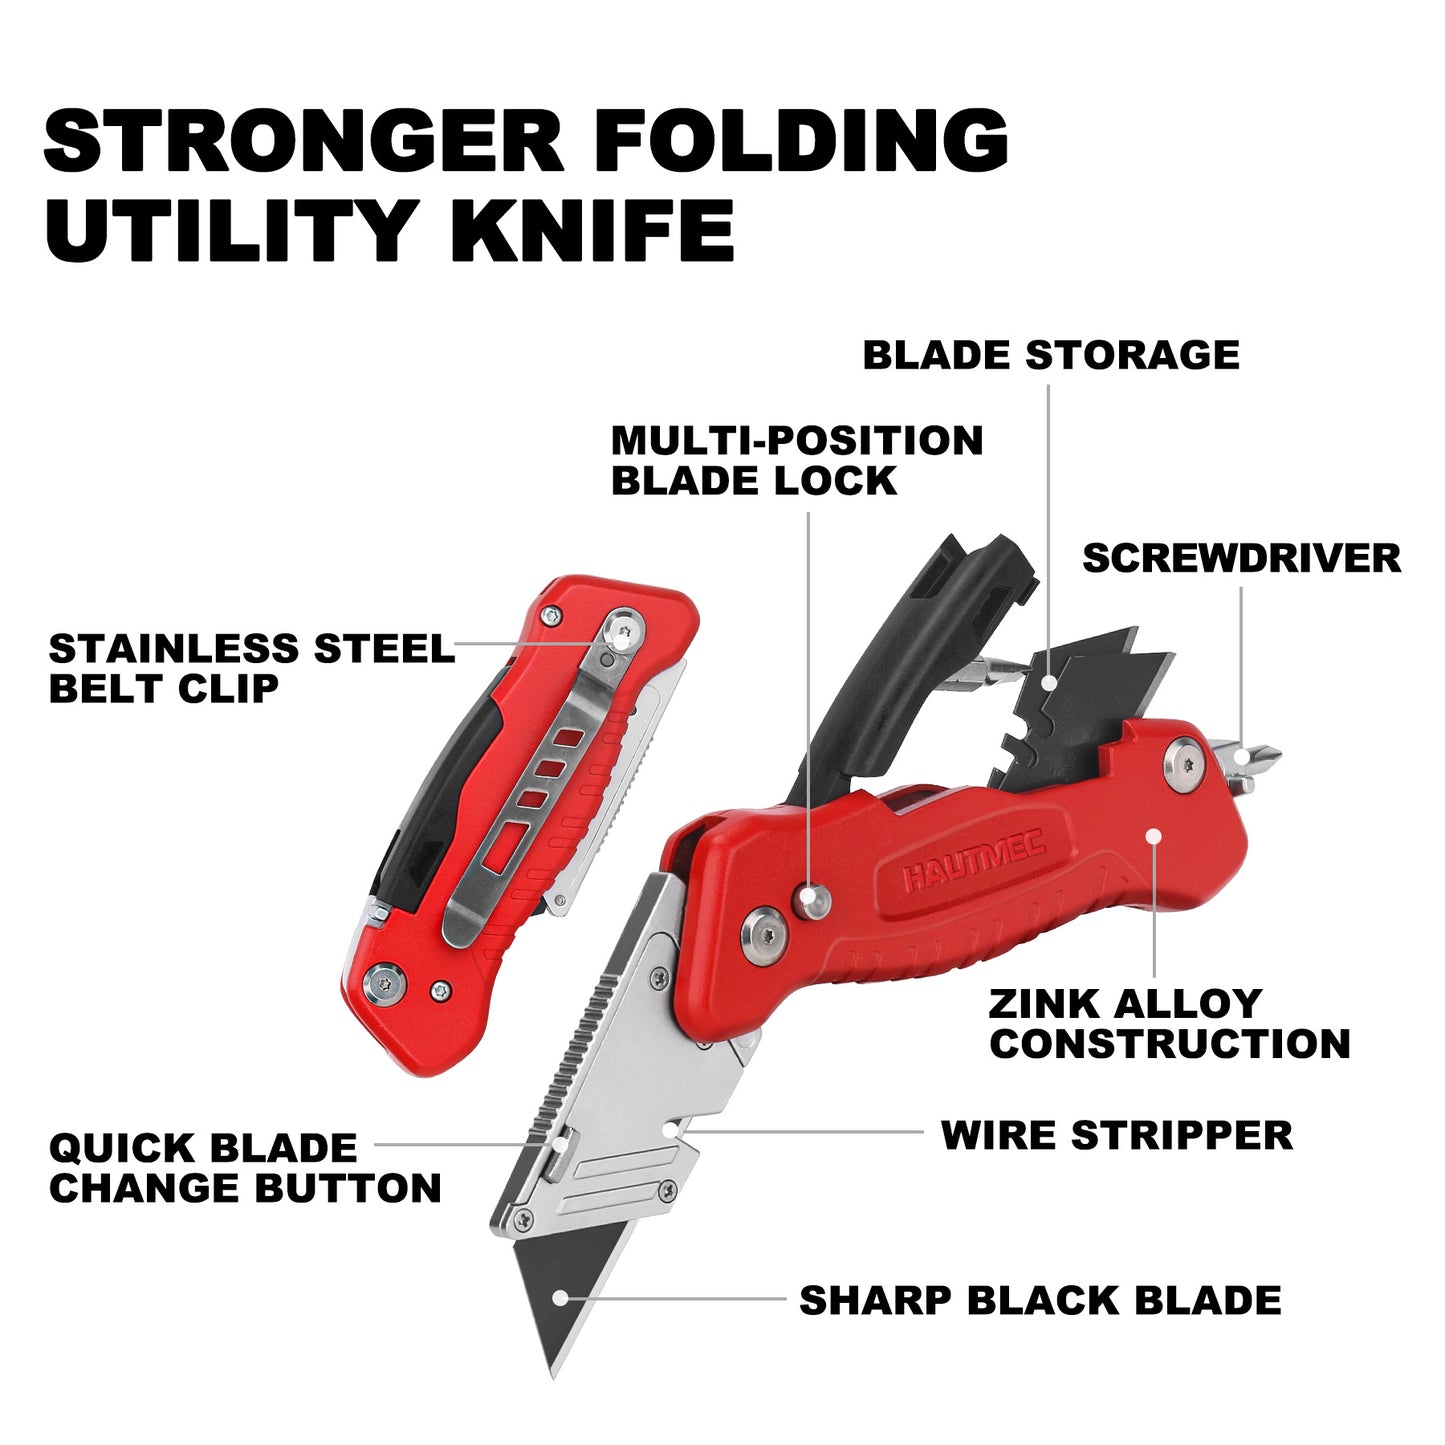 HAUTMEC Multifunctional Heavy Duty Folding Utility Knife With Integrated Screwdrivers, Box Cutter Built In Zinc Alloy Housing, 3 Extra Sharp Black SK4 Blades HT0294